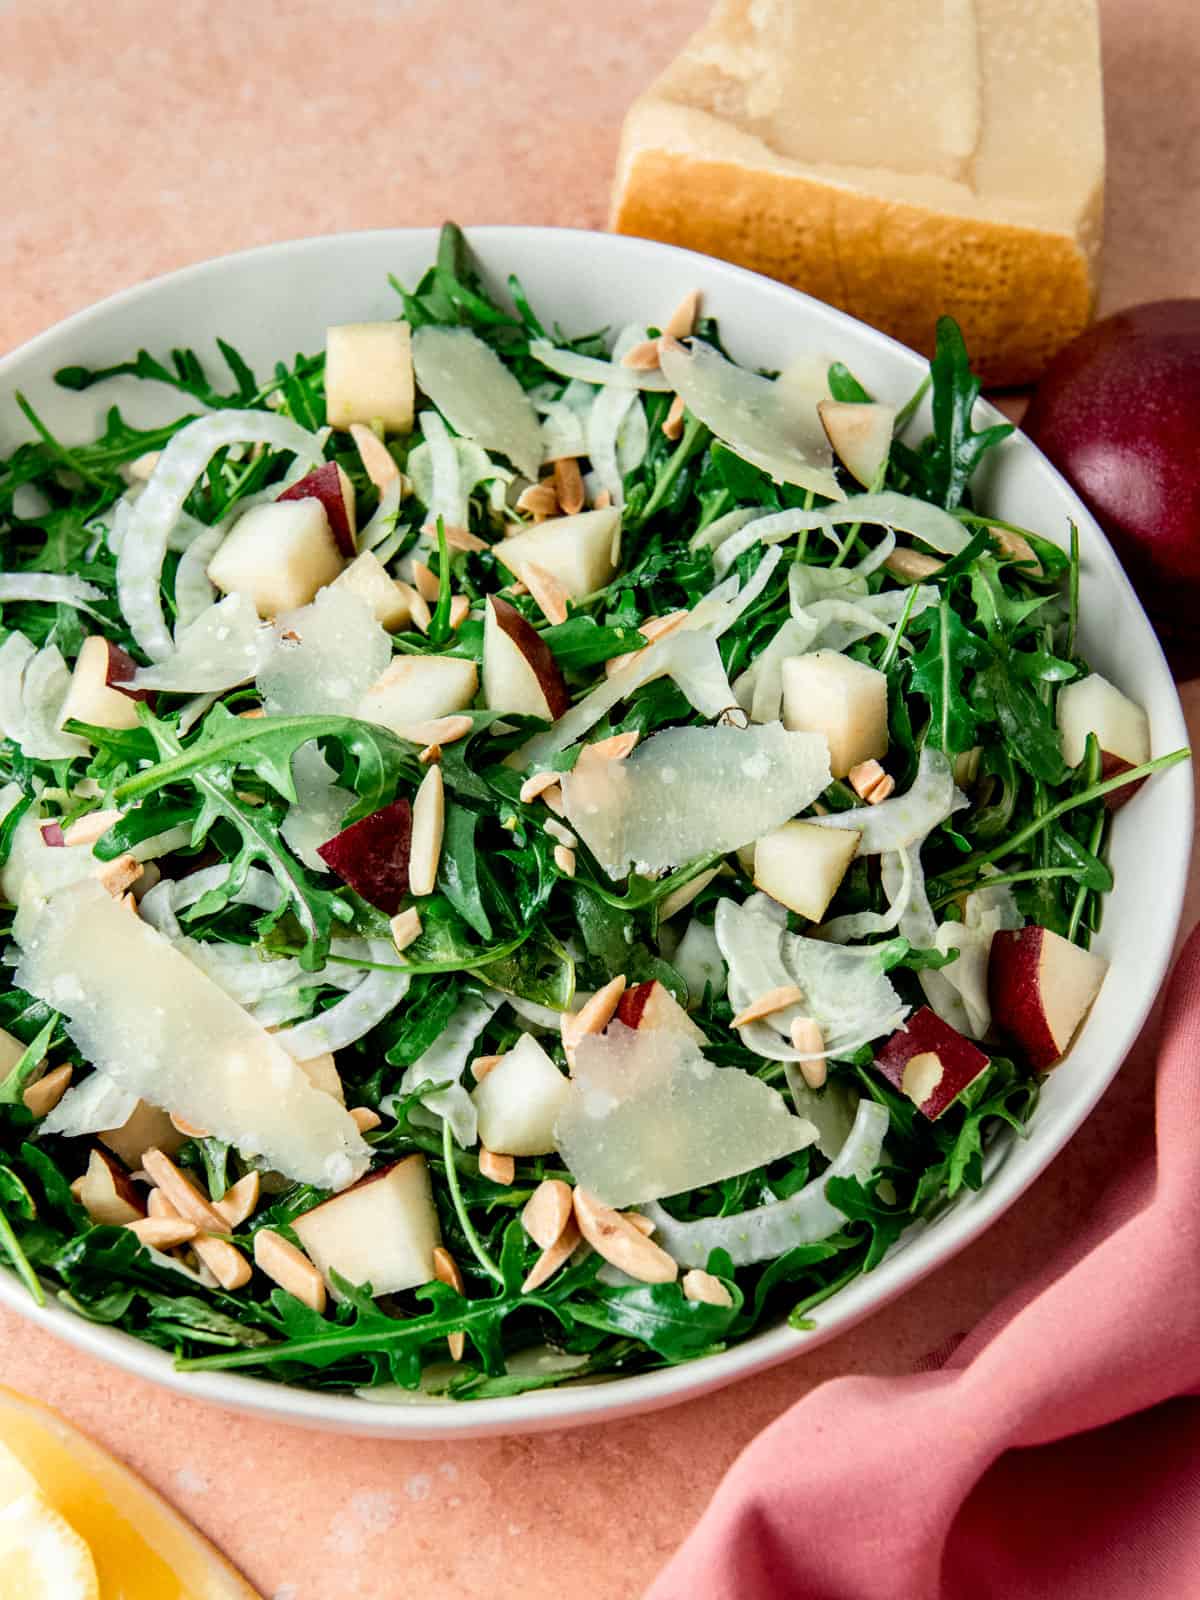 Arugula and fennel salad with shaved fennel, toasted almonds tossed with a parmesan vinaigrette.